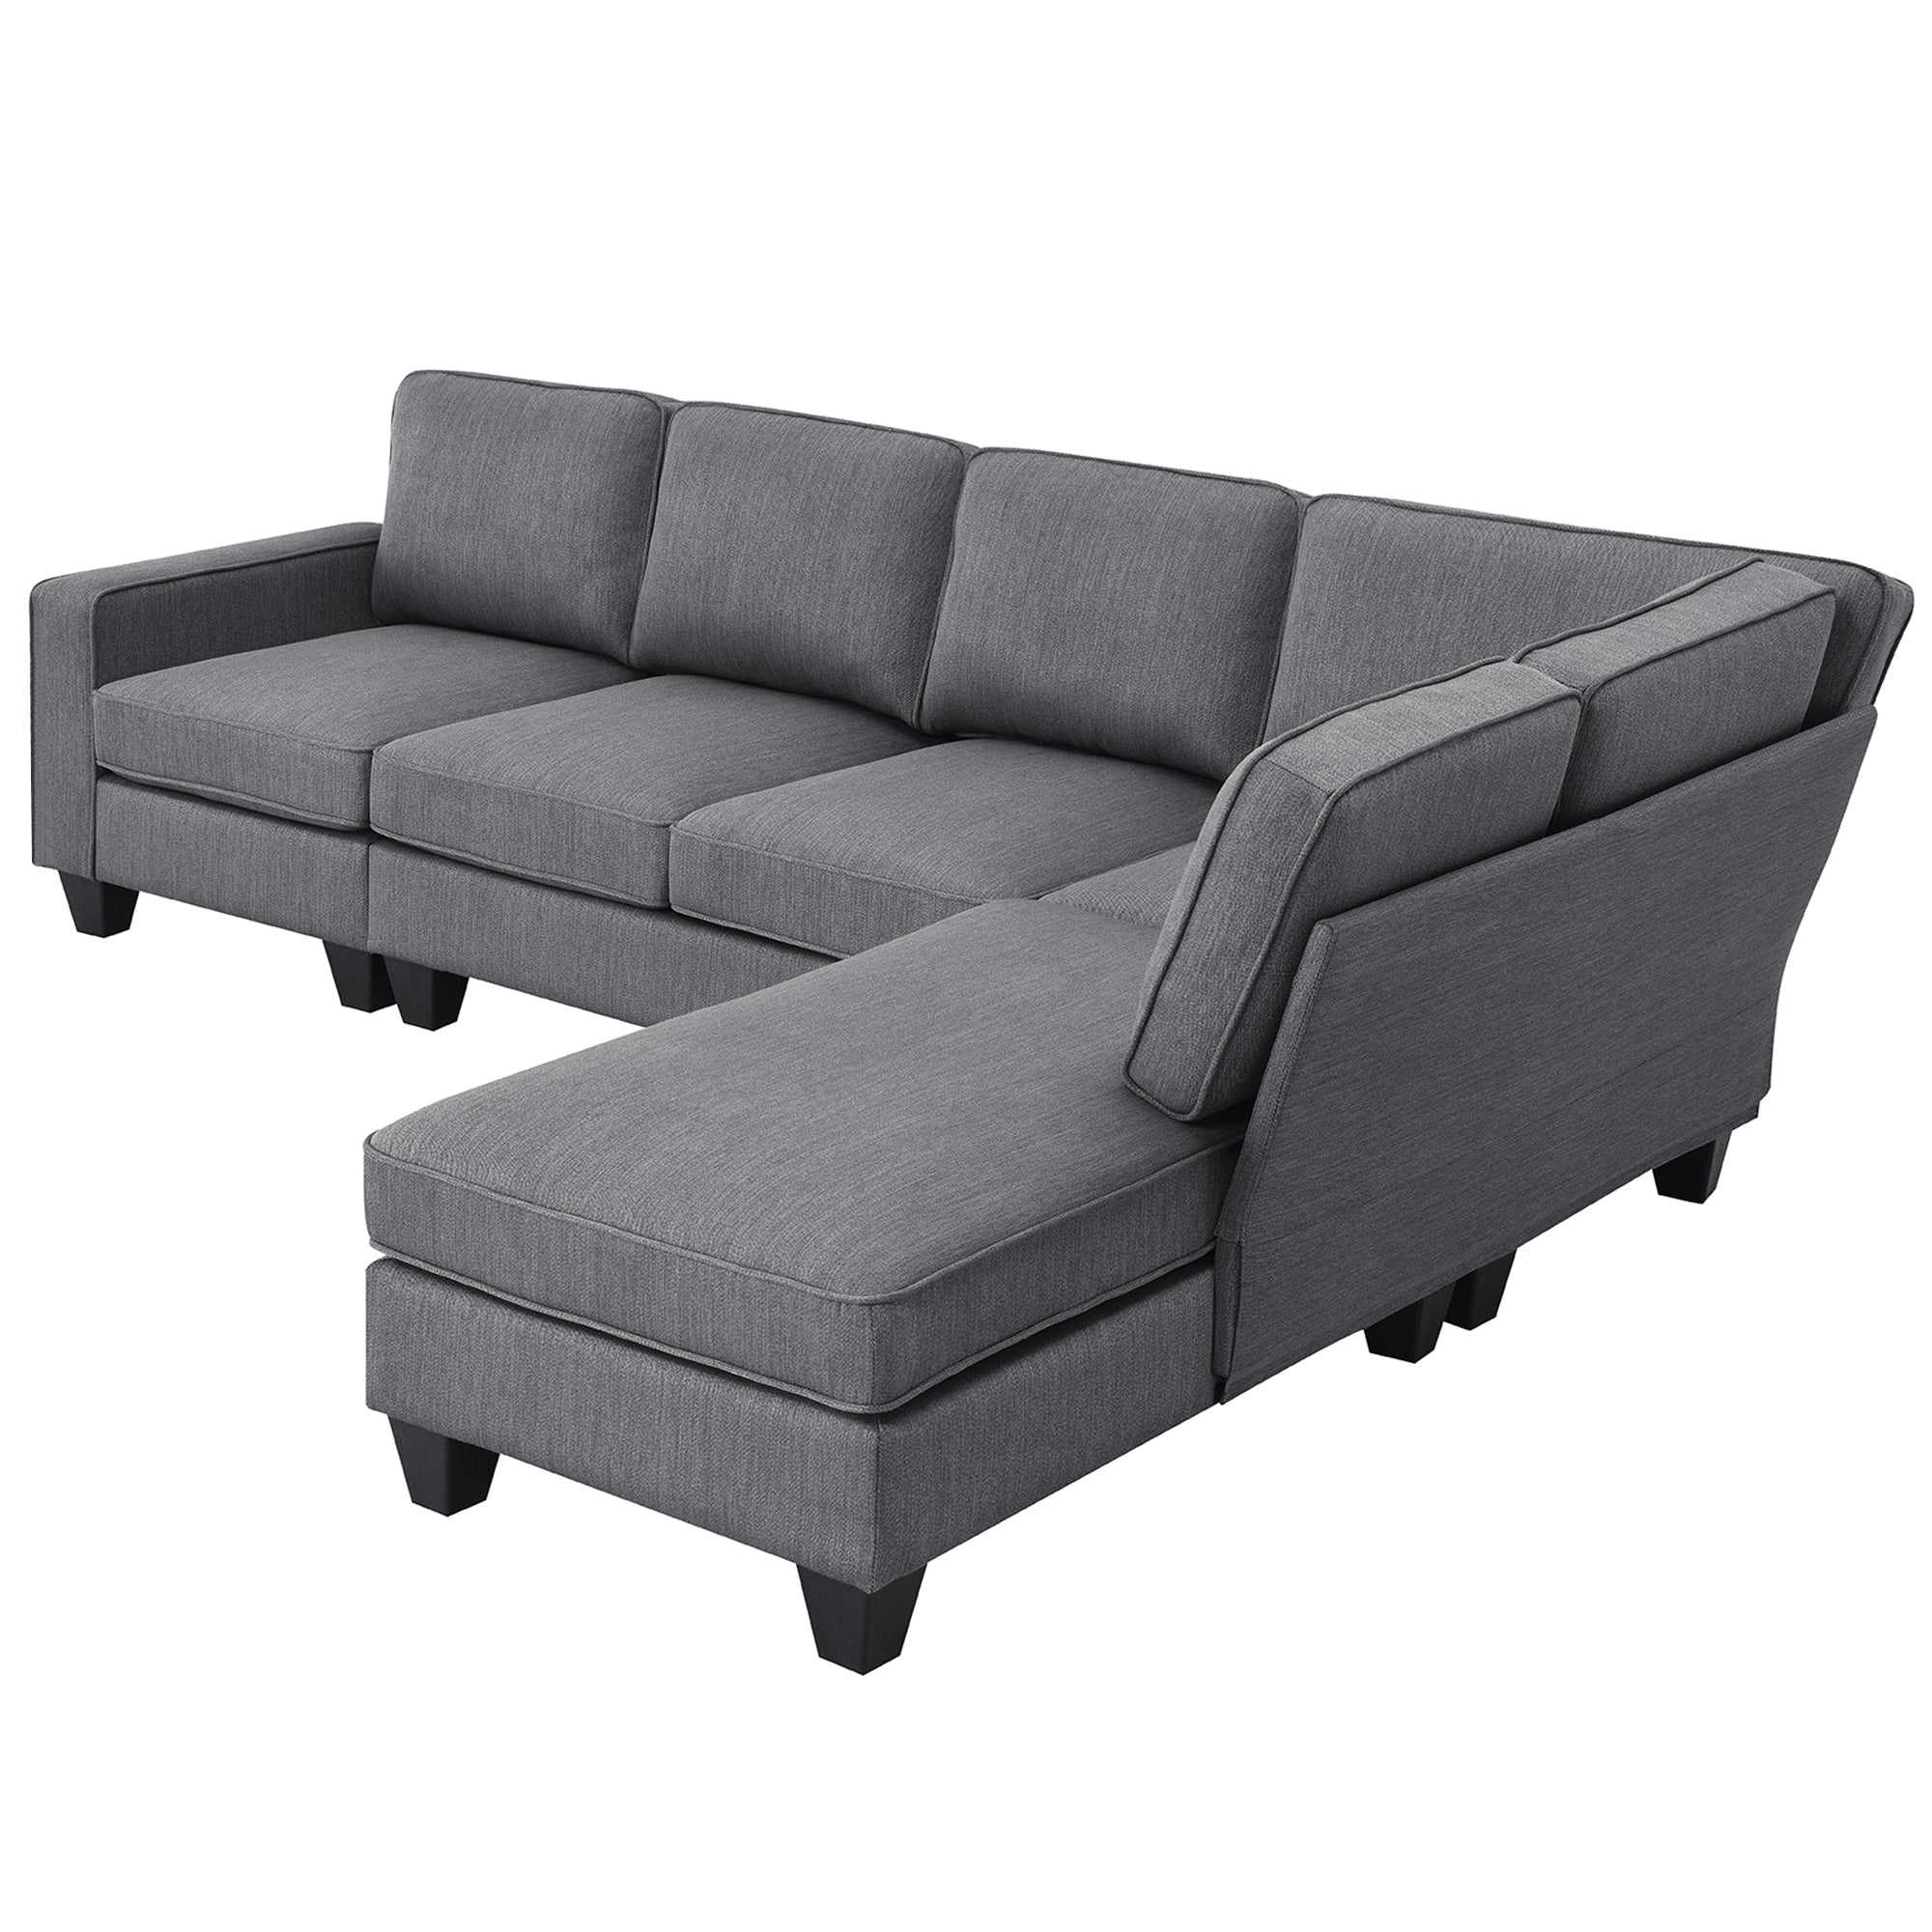 Modern L-Shaped Sectional Sofa | 7-Seat | Linen | Convertible Ottoman-Stationary Sectionals-American Furniture Outlet